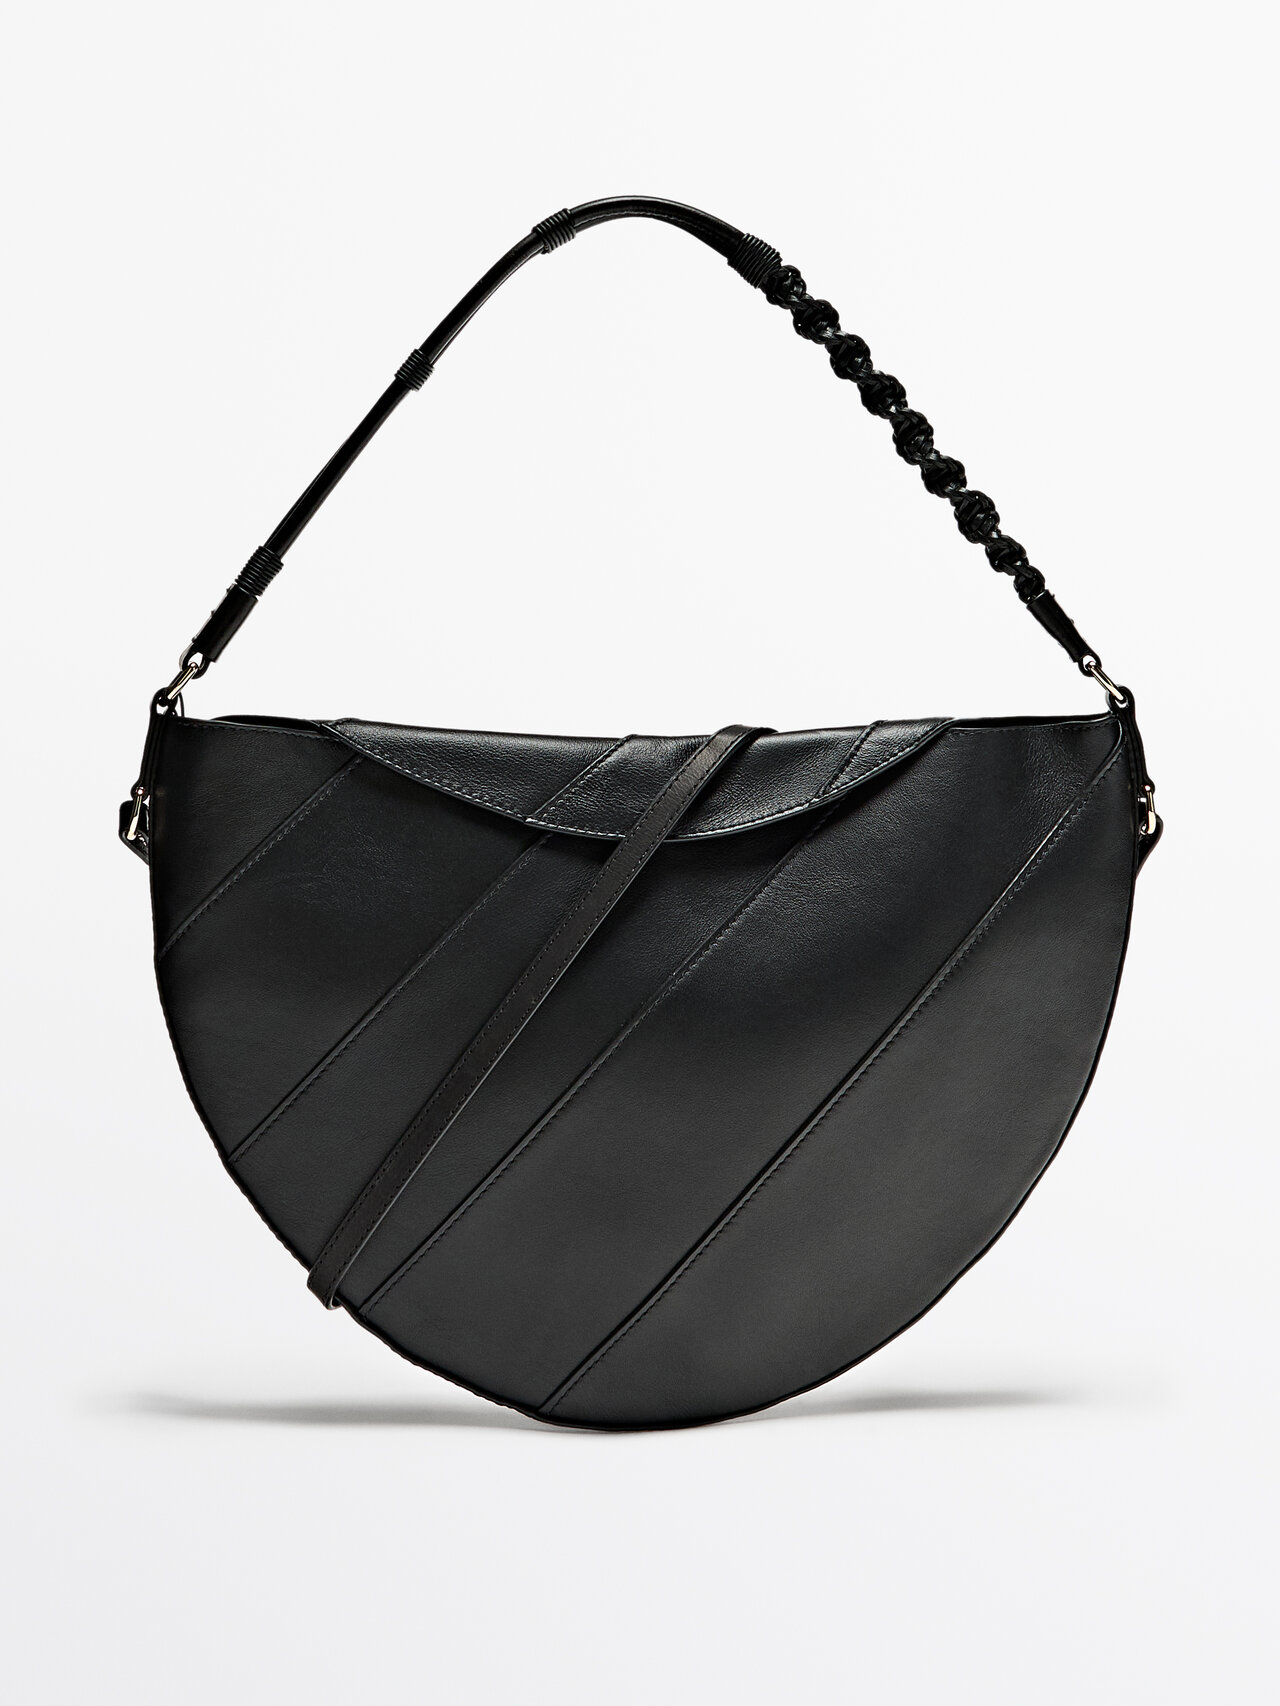 Massimo Dutti Nappa Leather Half-moon Bag With Woven Strap In Black